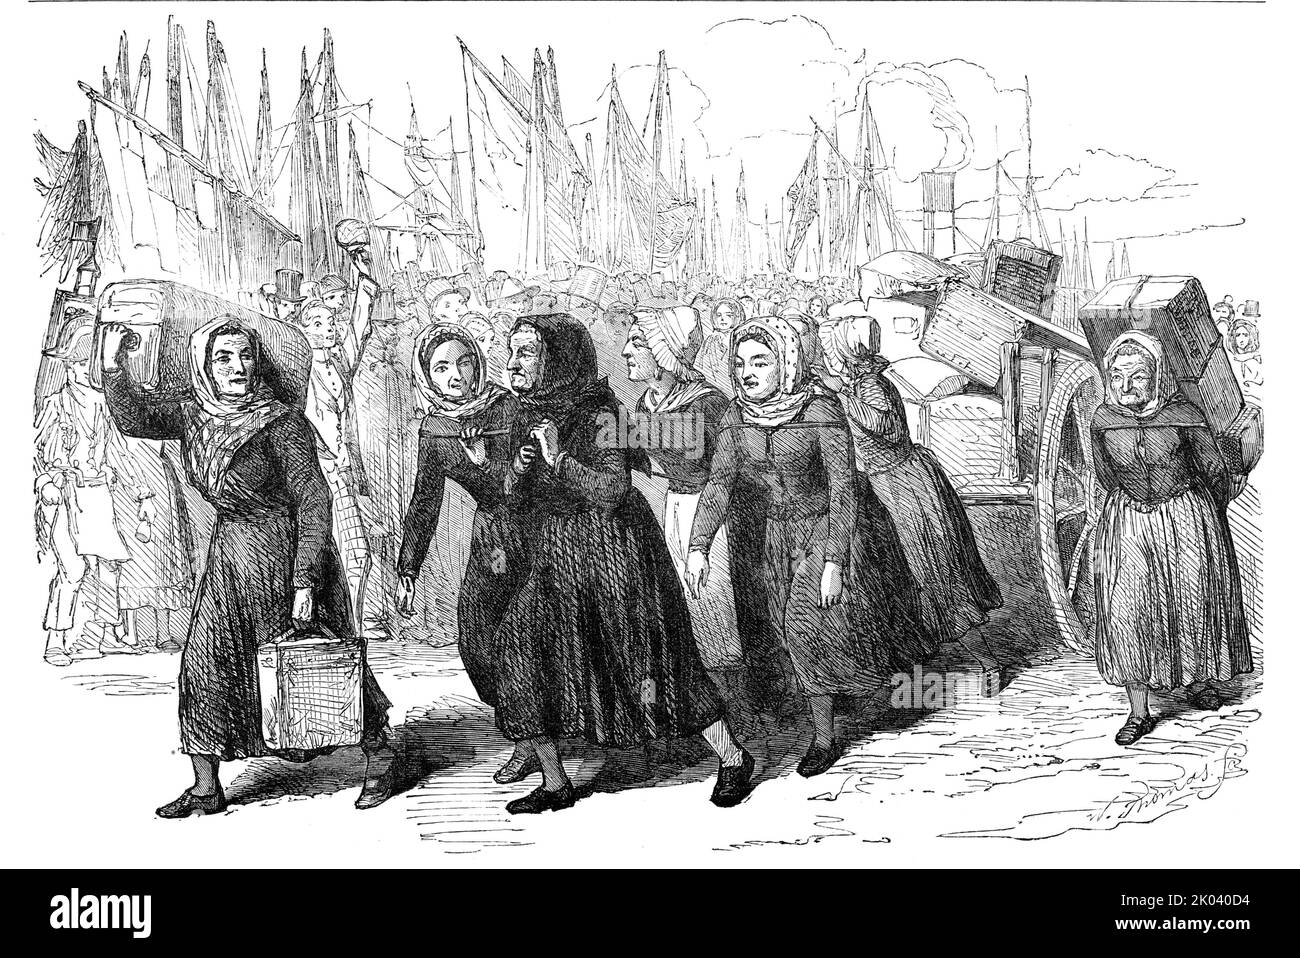 Boulogne Fishwomen carrying the Luggage of the Nurses for the East, 1854. British nurses attached to Florence Nightingale's staff travel via France to the hospital at Scutari during the Crimean War. '...the news of their arrival having spread, a crowd had assembled to welcome the self-devoted band, and bid them &quot;God speed!&quot; on their mission of charity...Miss Nightingale and the thirty-seven nurses who accompany her sailed, from Marseilles, in the Vectis steamer, for Constantinople. Throughout the whole of their journey through France they were everywhere received with demonstrations Stock Photo